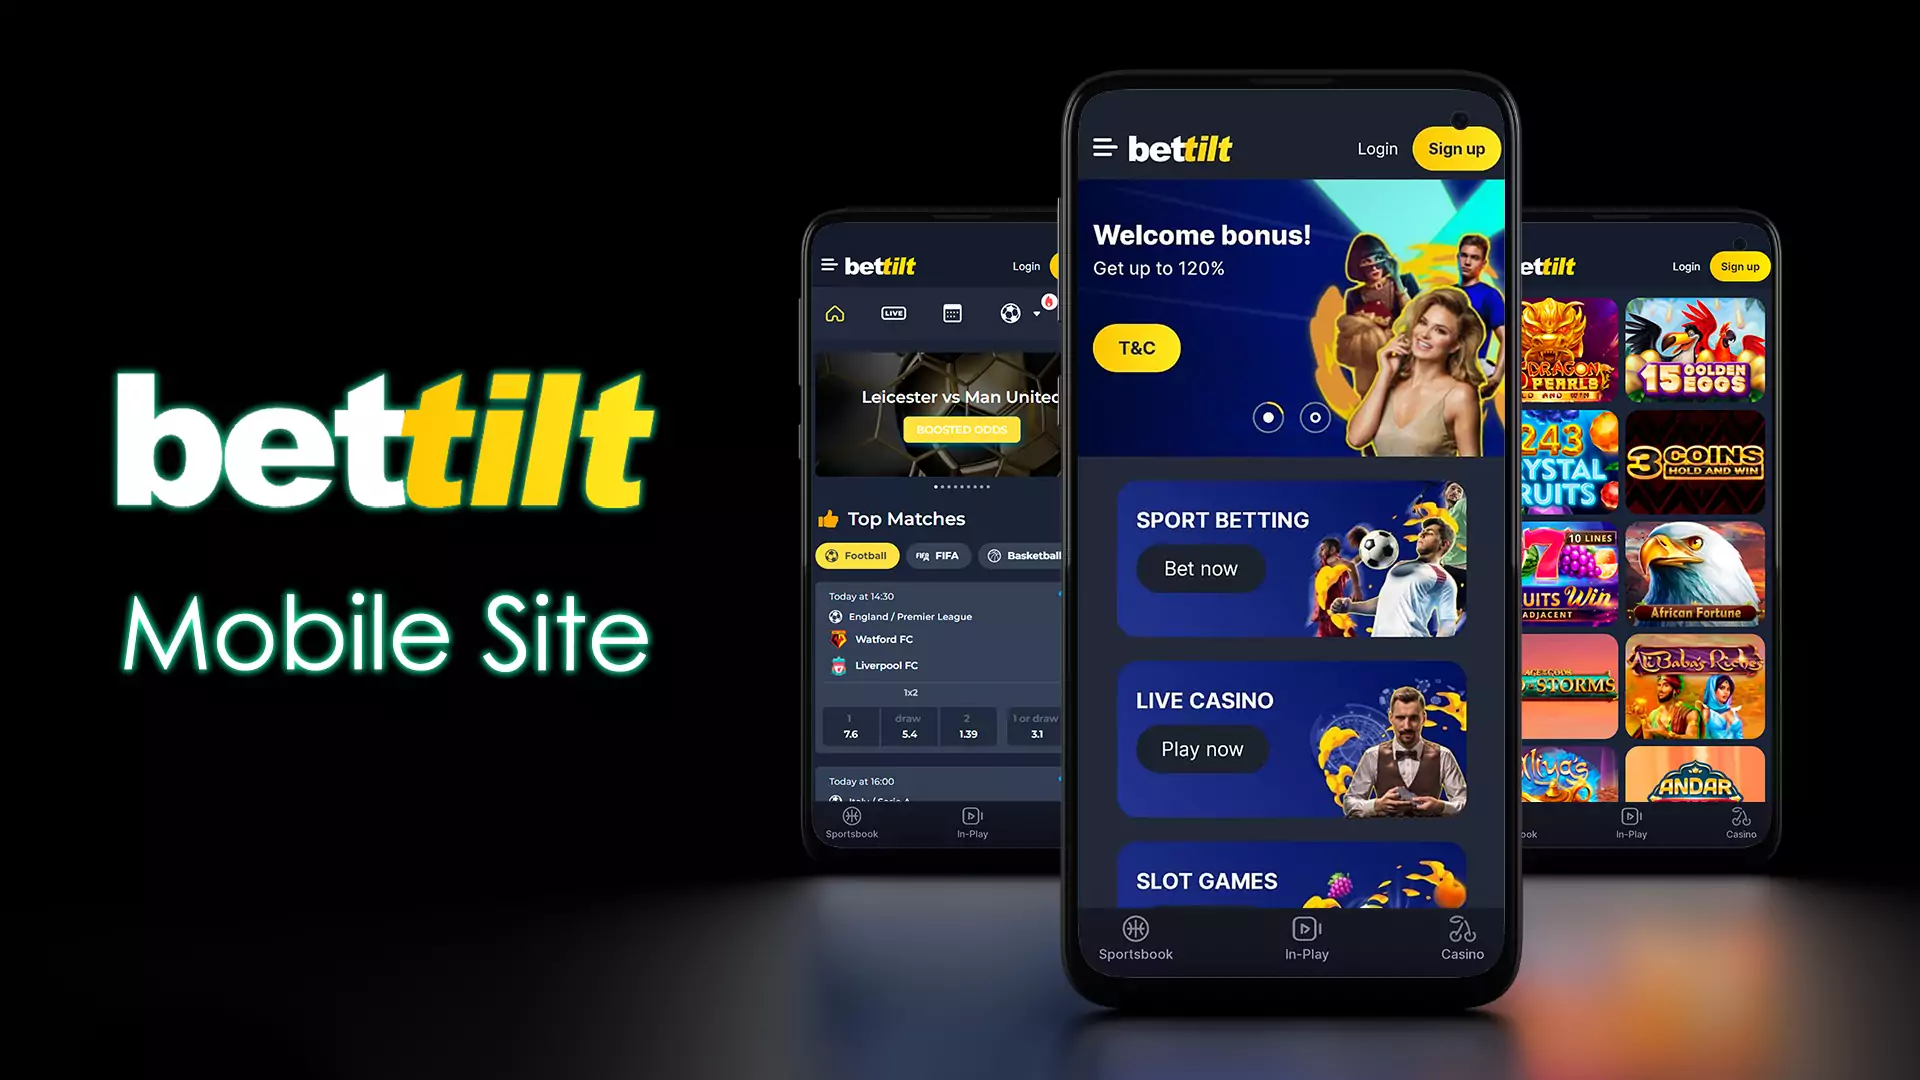 If you don't want to install the Bettilt app, you can place bets using the browser version.